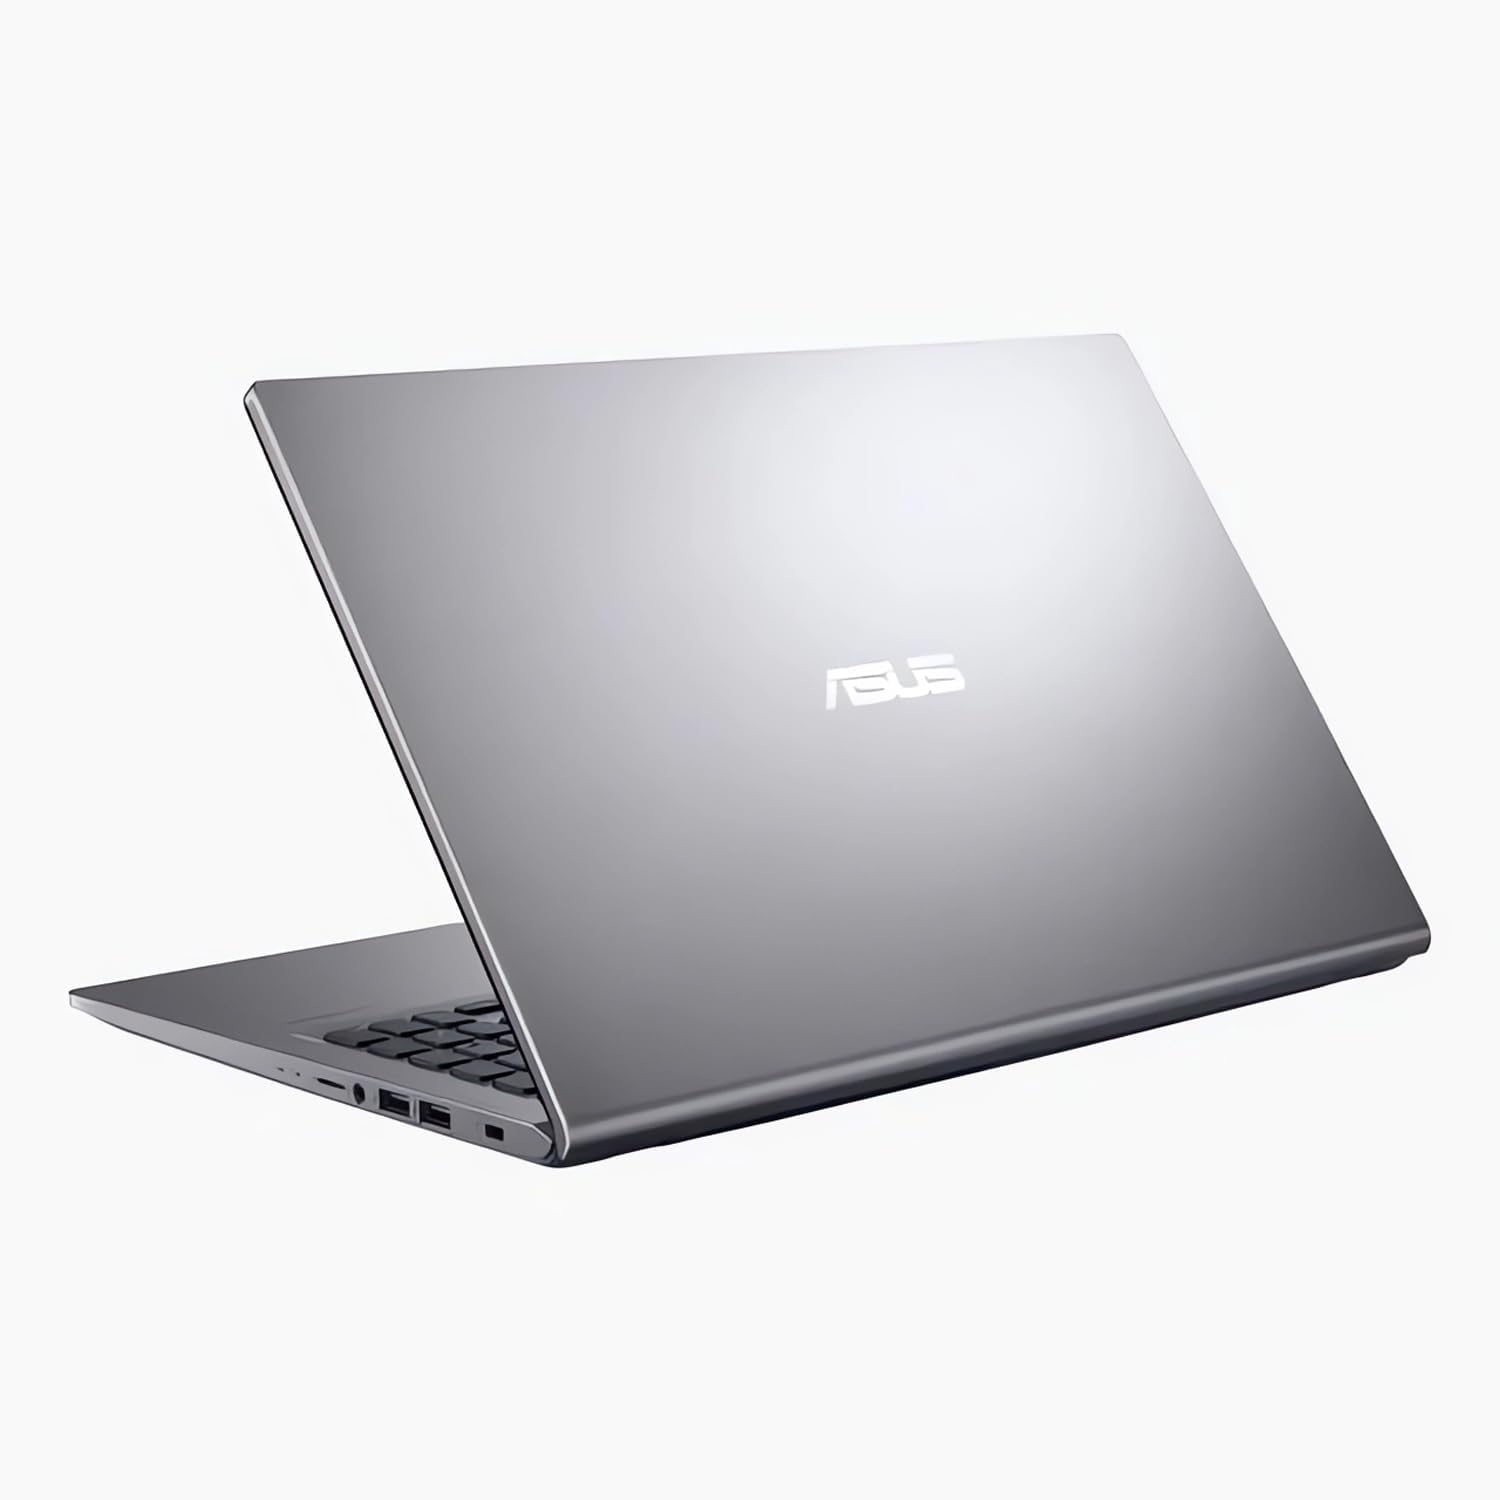 ASUS Vivobook 15.6” FHD Touchscreen Laptop, Intel Core i5-1135g7 (4-Core, up to 4.2 GHz), 8GB DDR4 RAM, 512GB PCIe SSD, Intel Iris Xe Graphics, Windows 11 Home, Grey,